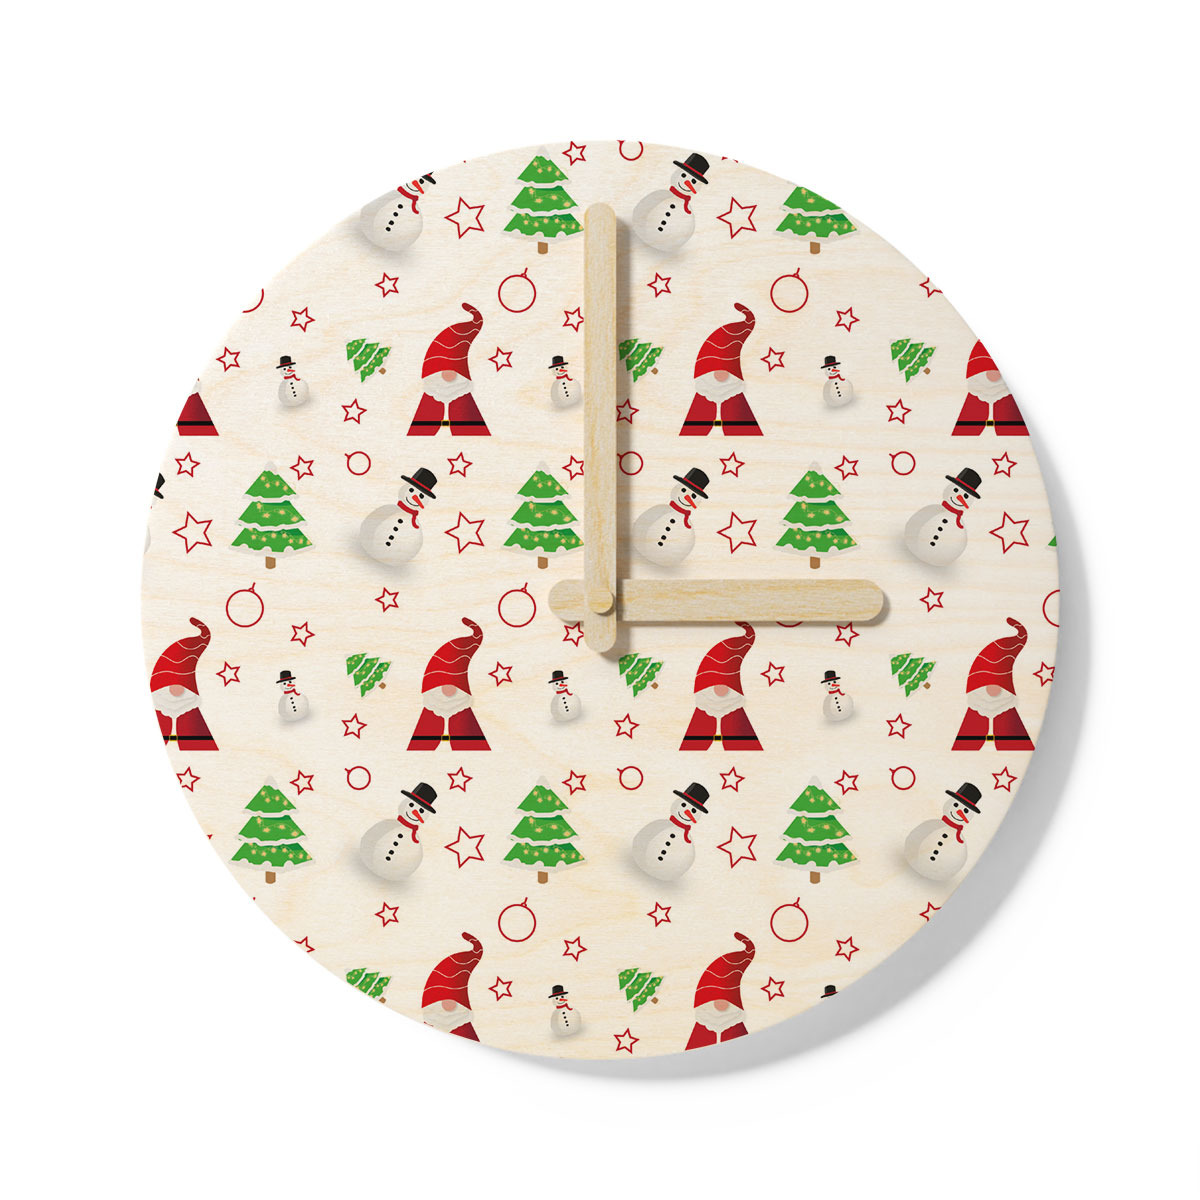 Santa Claus, Snowman Clipart And Pine Tree Silhouette Seamless Pattern Wooden Wall Clock